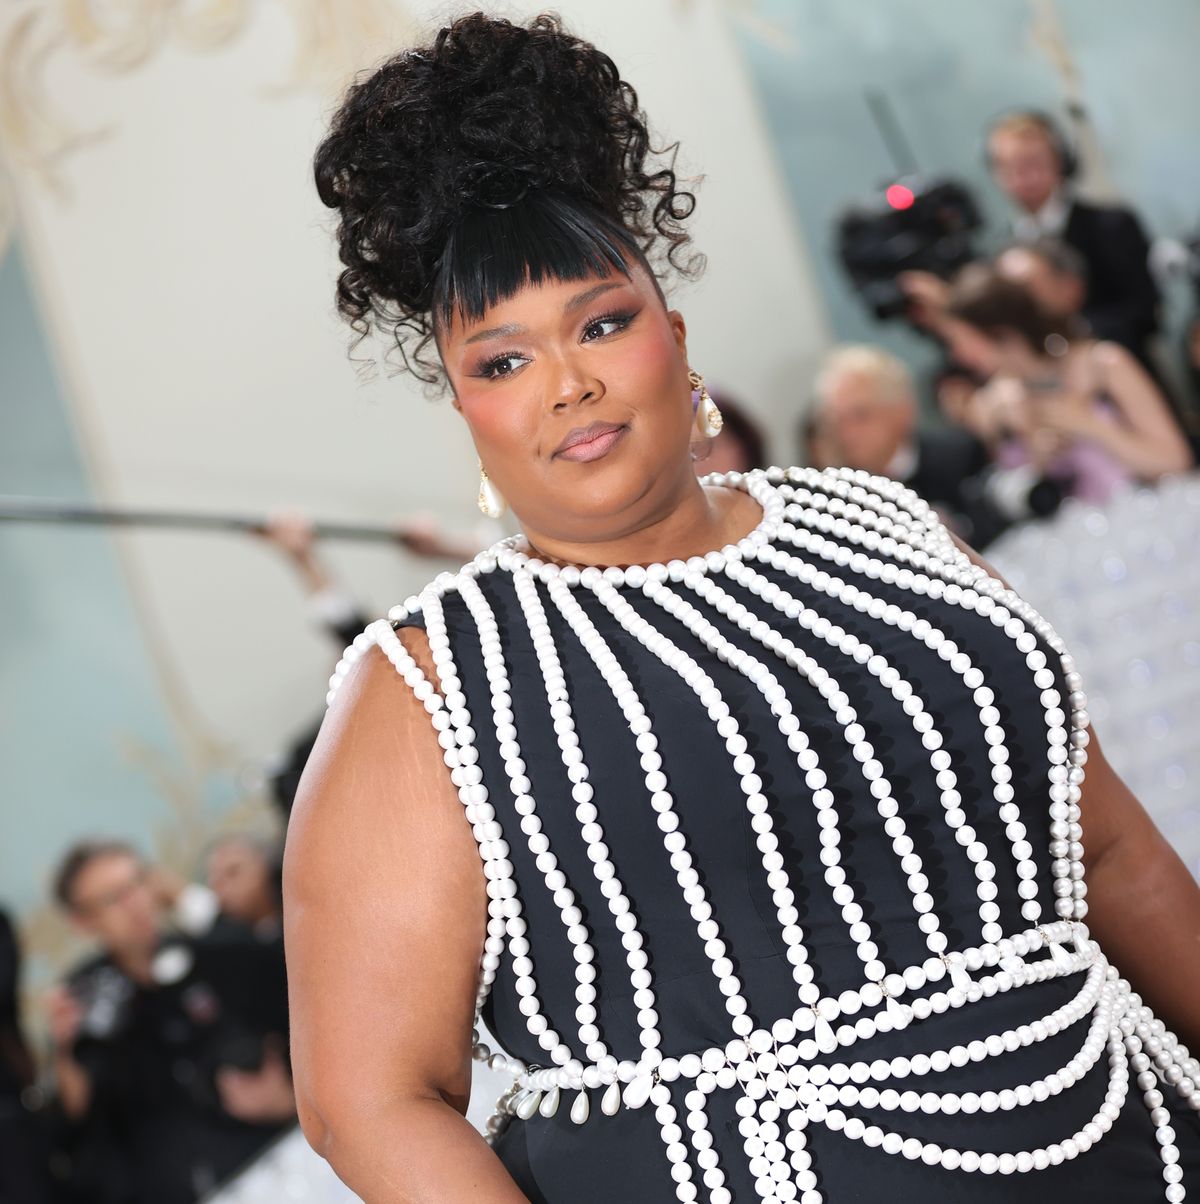 Lizzo Shuts Down the Idea that Plus-Size People Only Work Out to